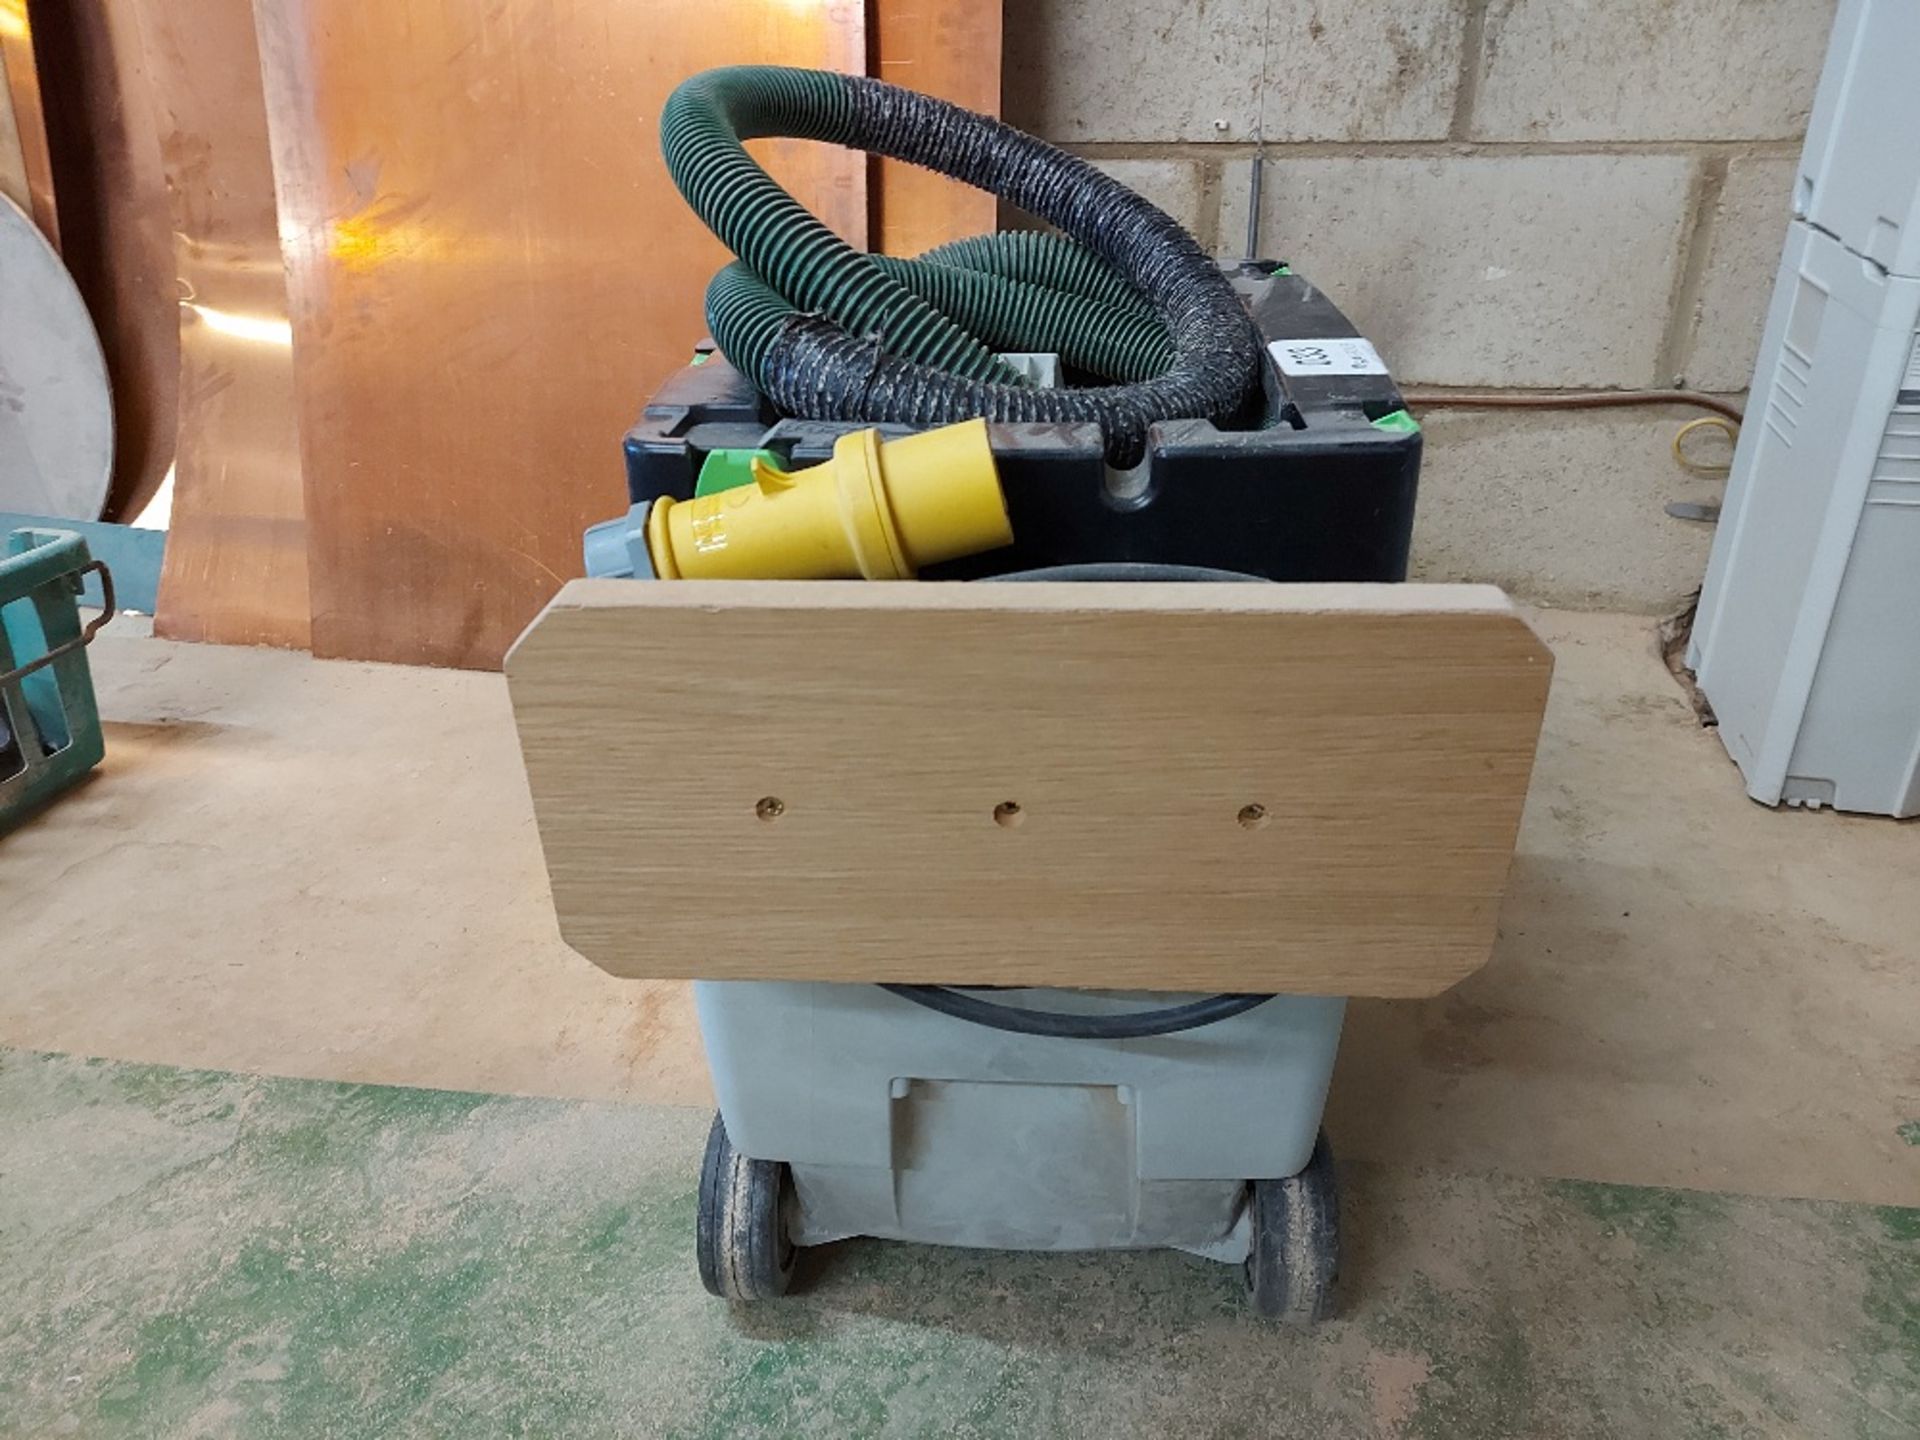 Festool CLEANTEC CTL MIDI 230V Mobile Dust Extractor with Three Phase Transformer - Image 4 of 4